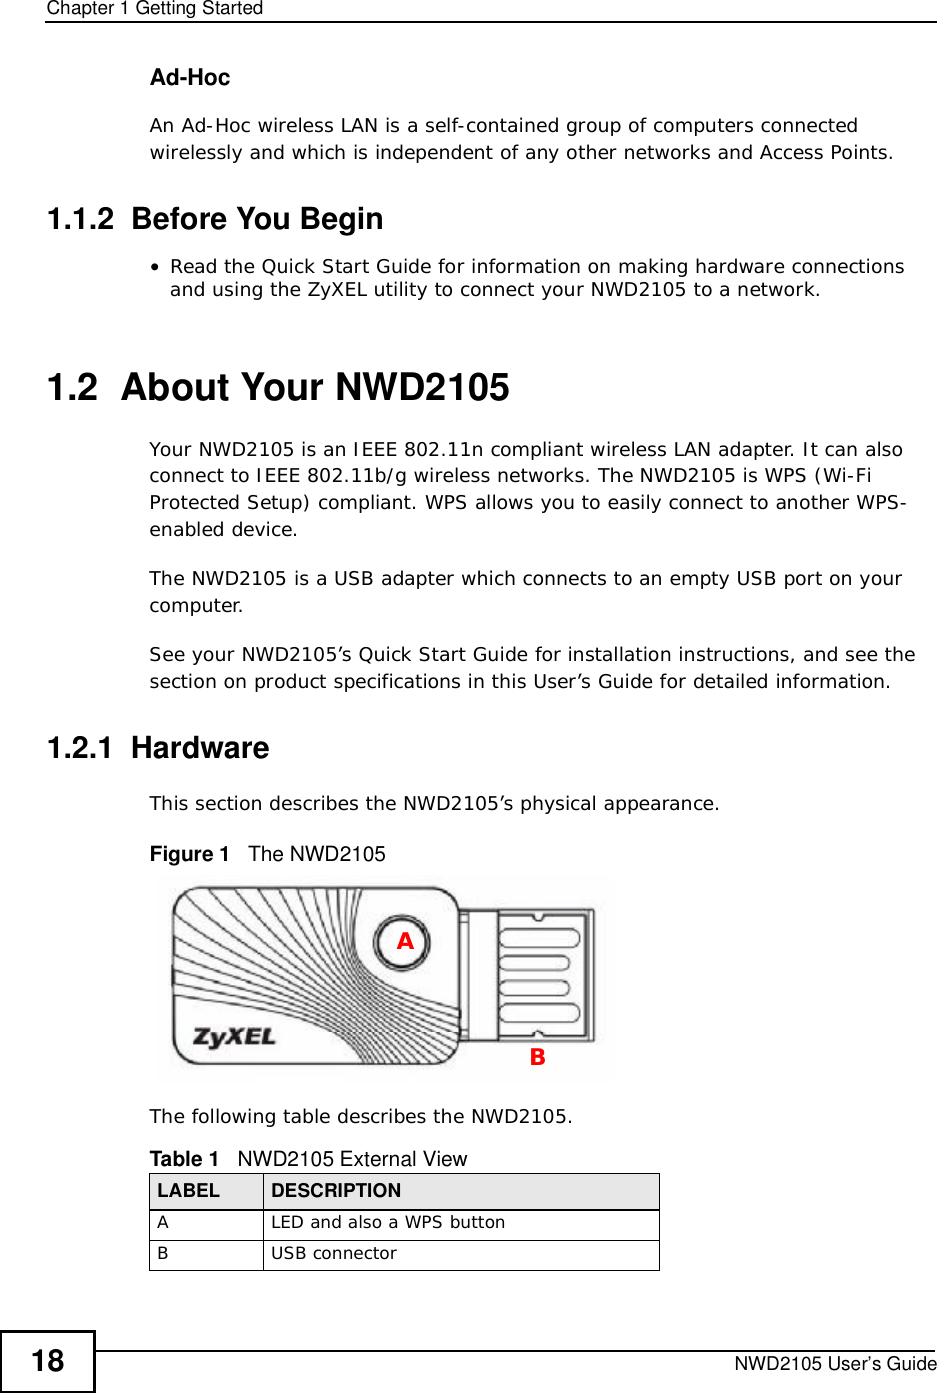 Chapter 1Getting StartedNWD2105 User’s Guide18Ad-HocAn Ad-Hoc wireless LAN is a self-contained group of computers connected wirelessly and which is independent of any other networks and Access Points.1.1.2  Before You Begin•Read the Quick Start Guide for information on making hardware connections and using the ZyXEL utility to connect your NWD2105 to a network.1.2  About Your NWD2105    Your NWD2105 is an IEEE 802.11n compliant wireless LAN adapter. It can also connect to IEEE 802.11b/g wireless networks. The NWD2105 is WPS (Wi-Fi Protected Setup) compliant. WPS allows you to easily connect to another WPS-enabled device. The NWD2105 is a USB adapter which connects to an empty USB port on your computer.See your NWD2105’s Quick Start Guide for installation instructions, and see the section on product specifications in this User’s Guide for detailed information.1.2.1  HardwareThis section describes the NWD2105’s physical appearance.Figure 1   The NWD2105The following table describes the NWD2105.Table 1   NWD2105 External ViewLABEL DESCRIPTIONALED and also a WPS buttonBUSB connectorAB